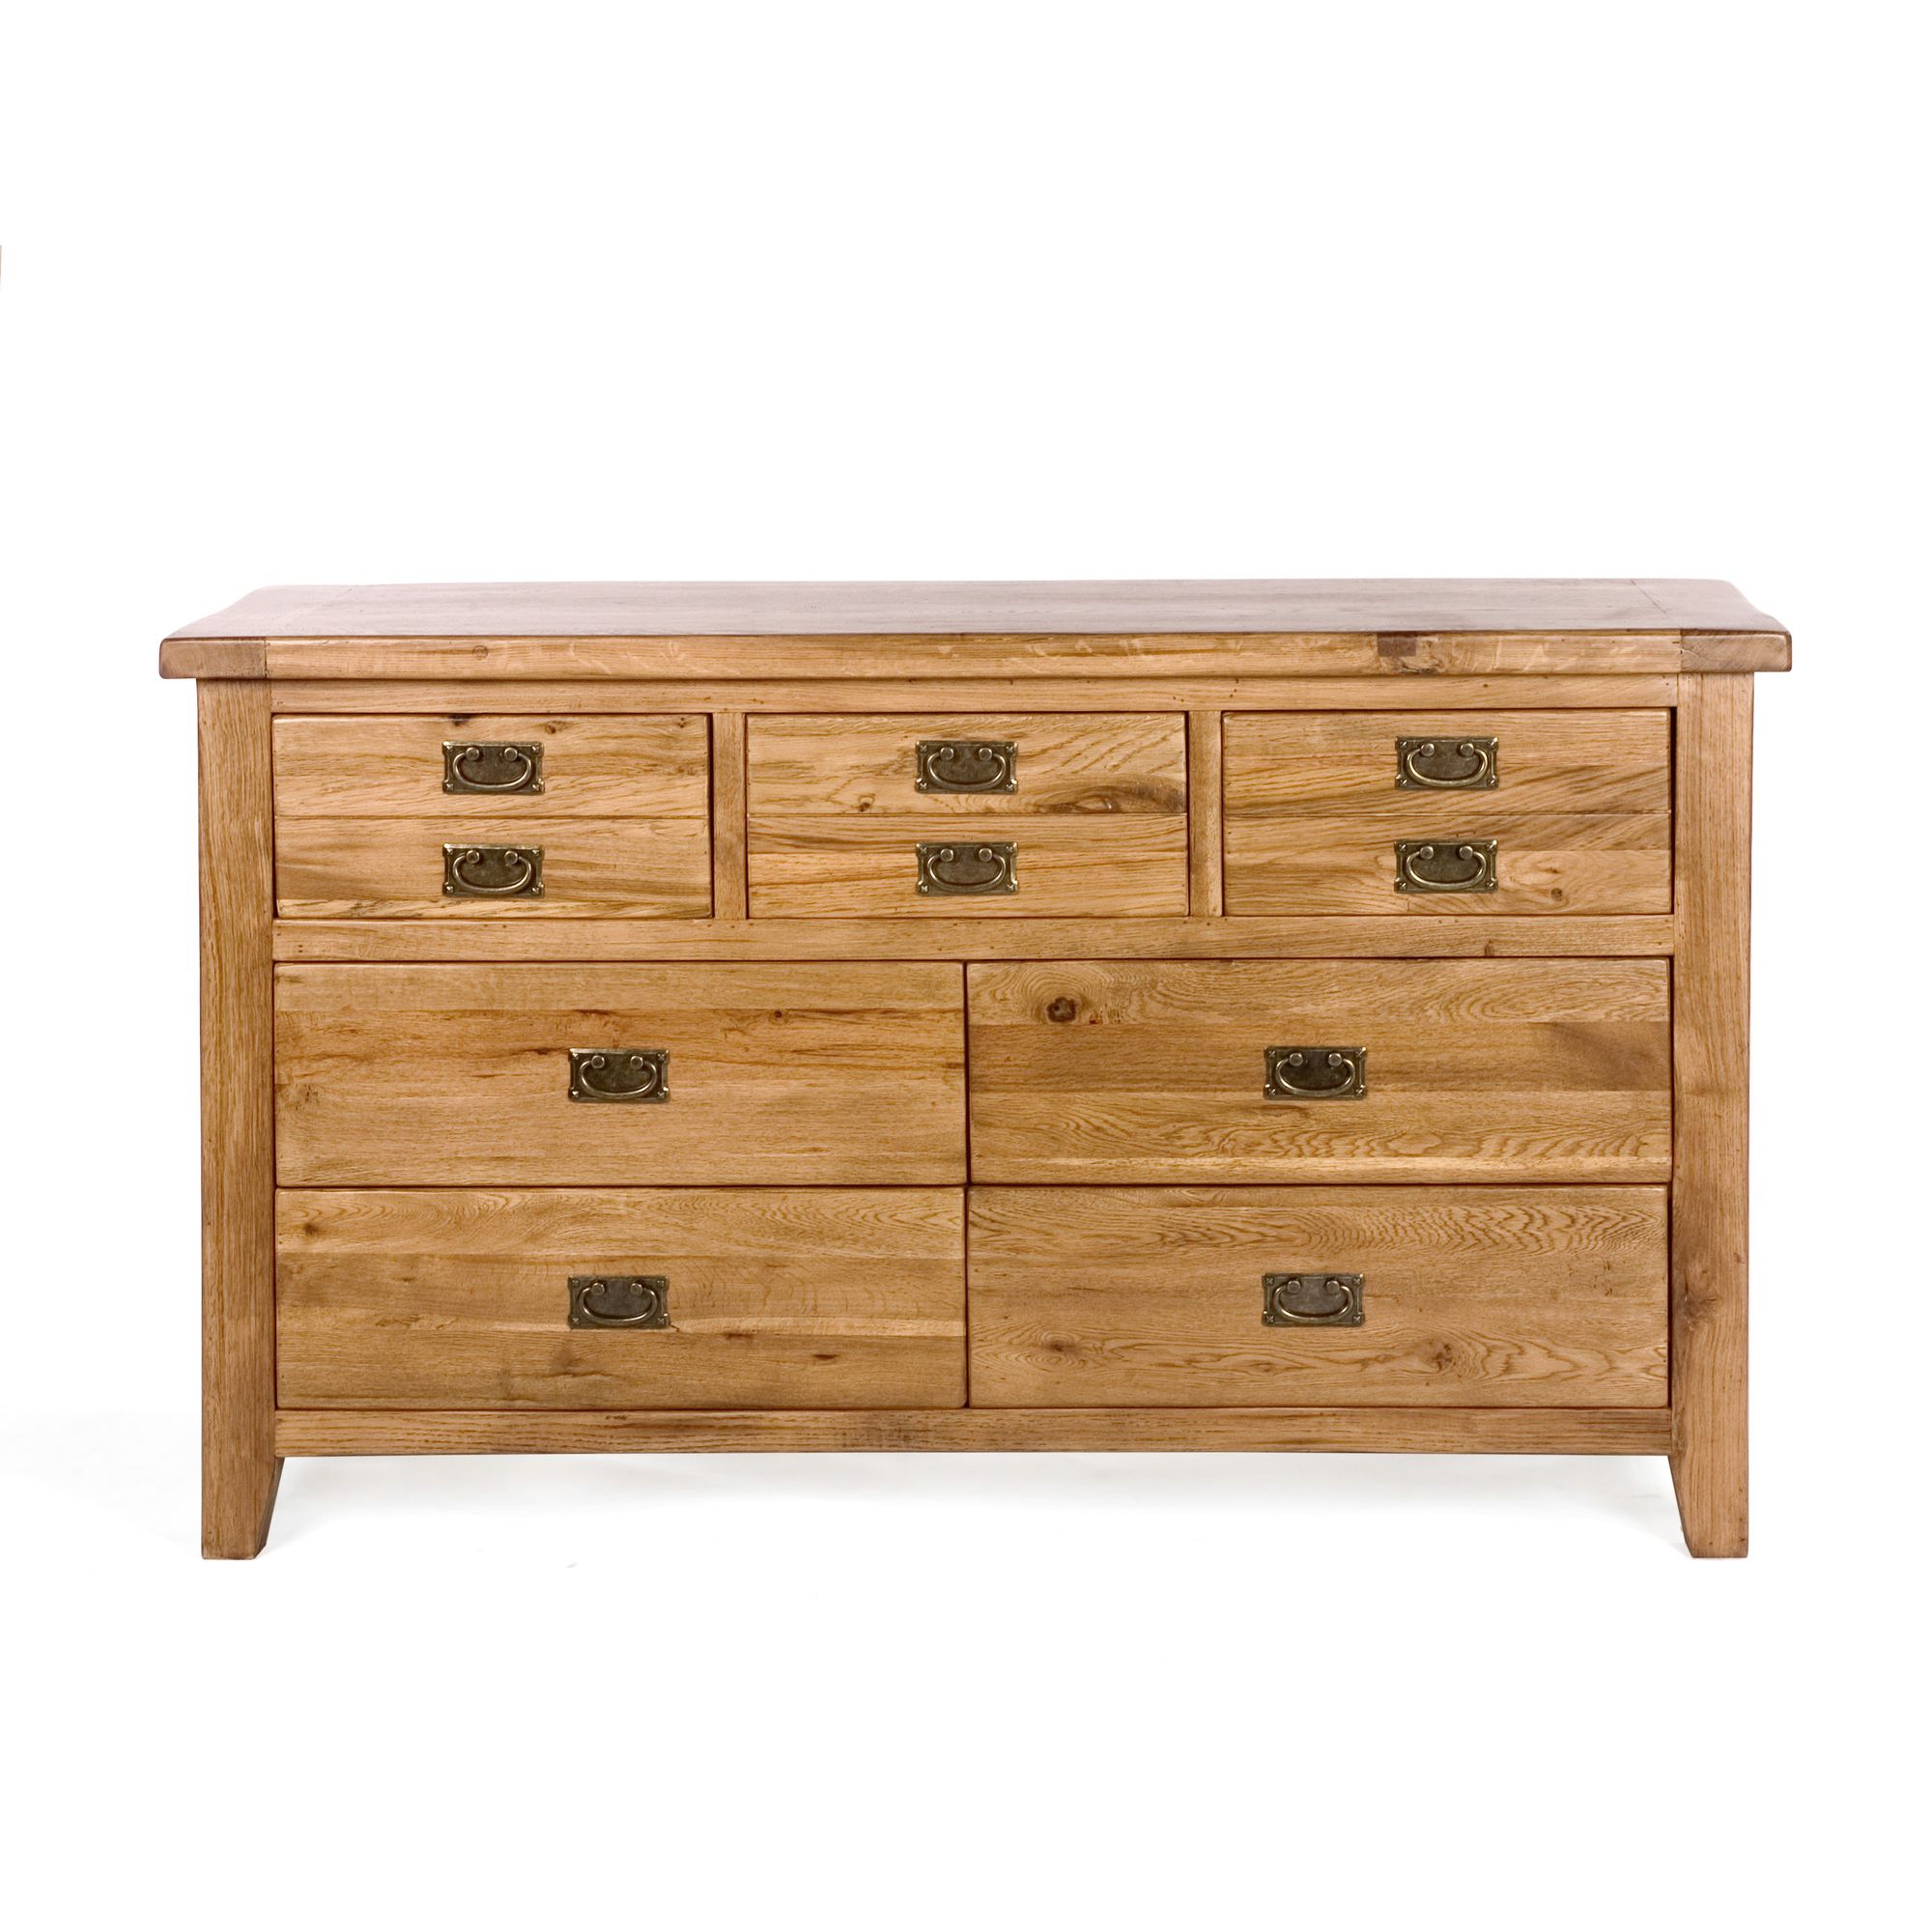 Wiseaction Florence 7 Drawer Chest at Tesco Direct